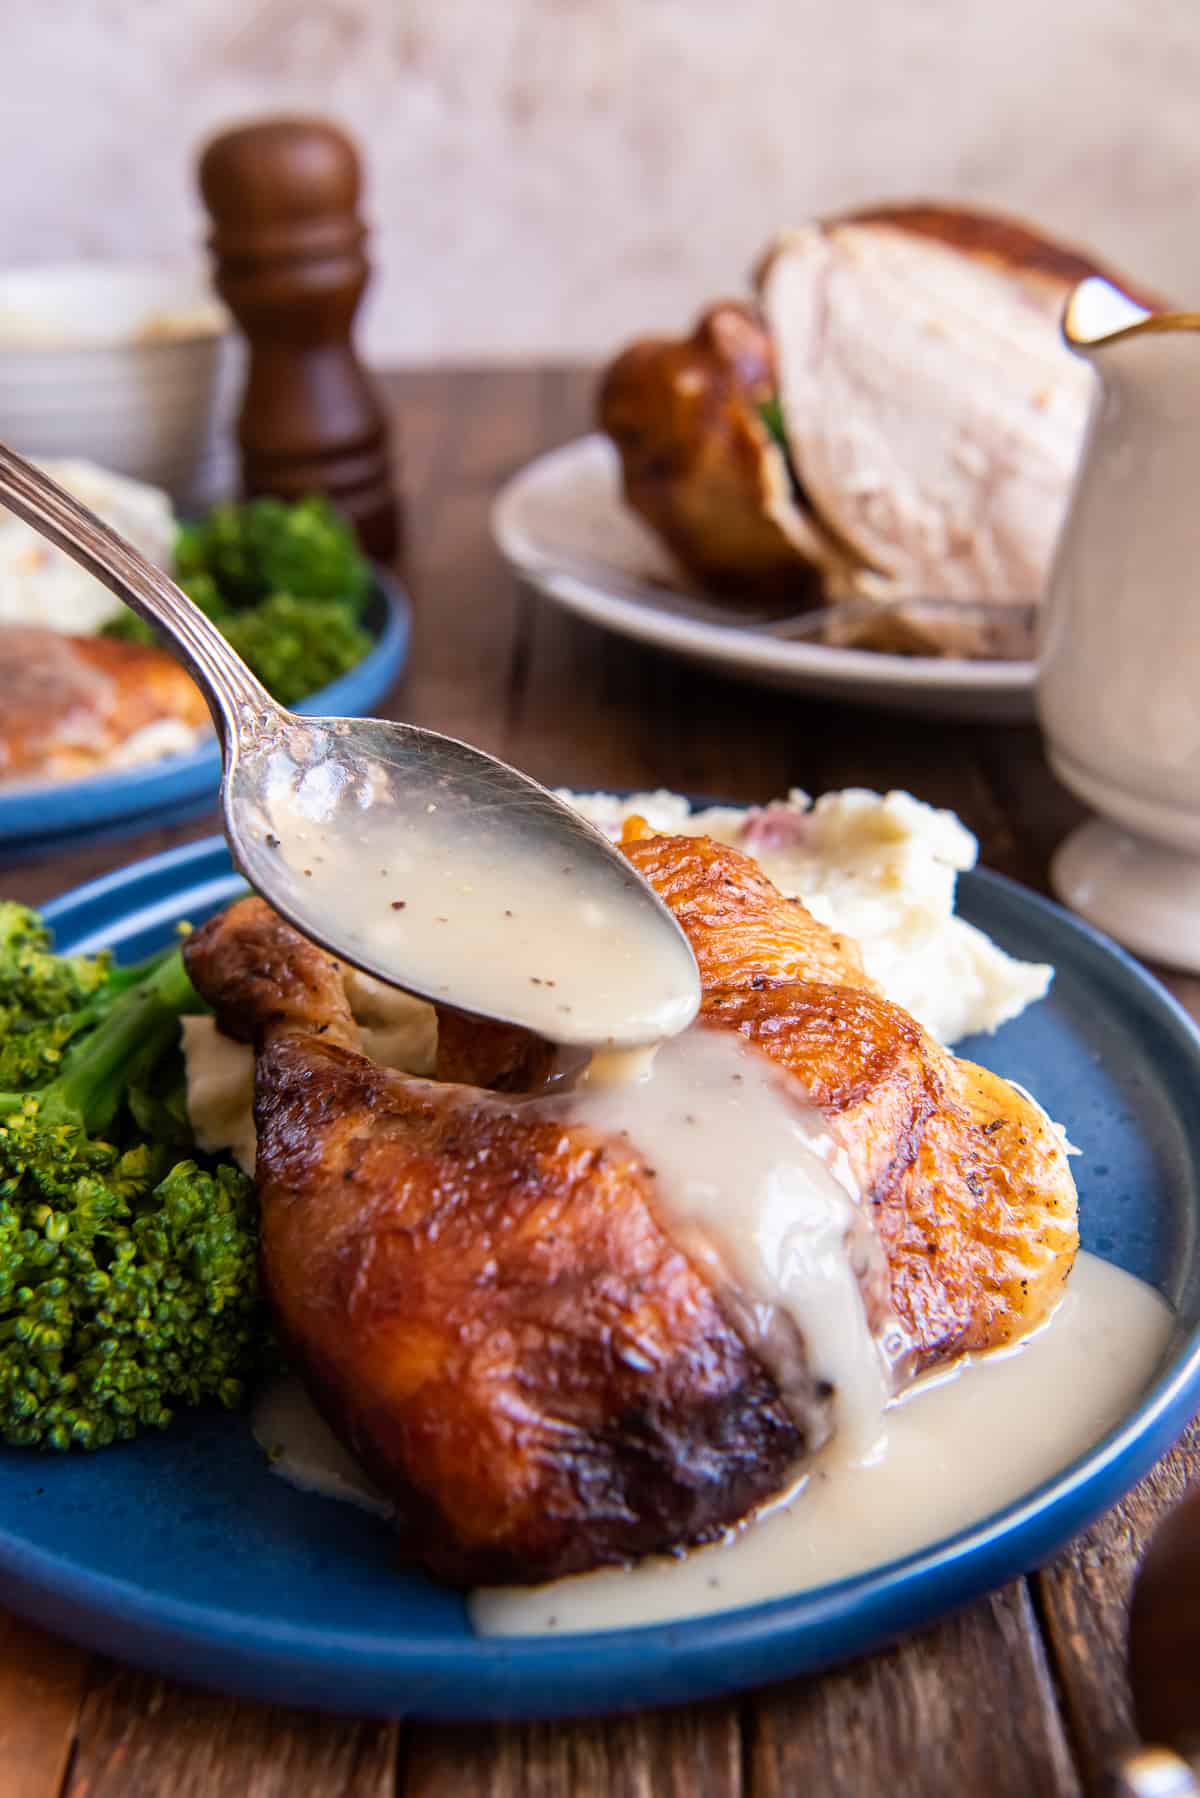 Gravy pouring from a spoon over a piece of rotisserie chicken on a blue plate.